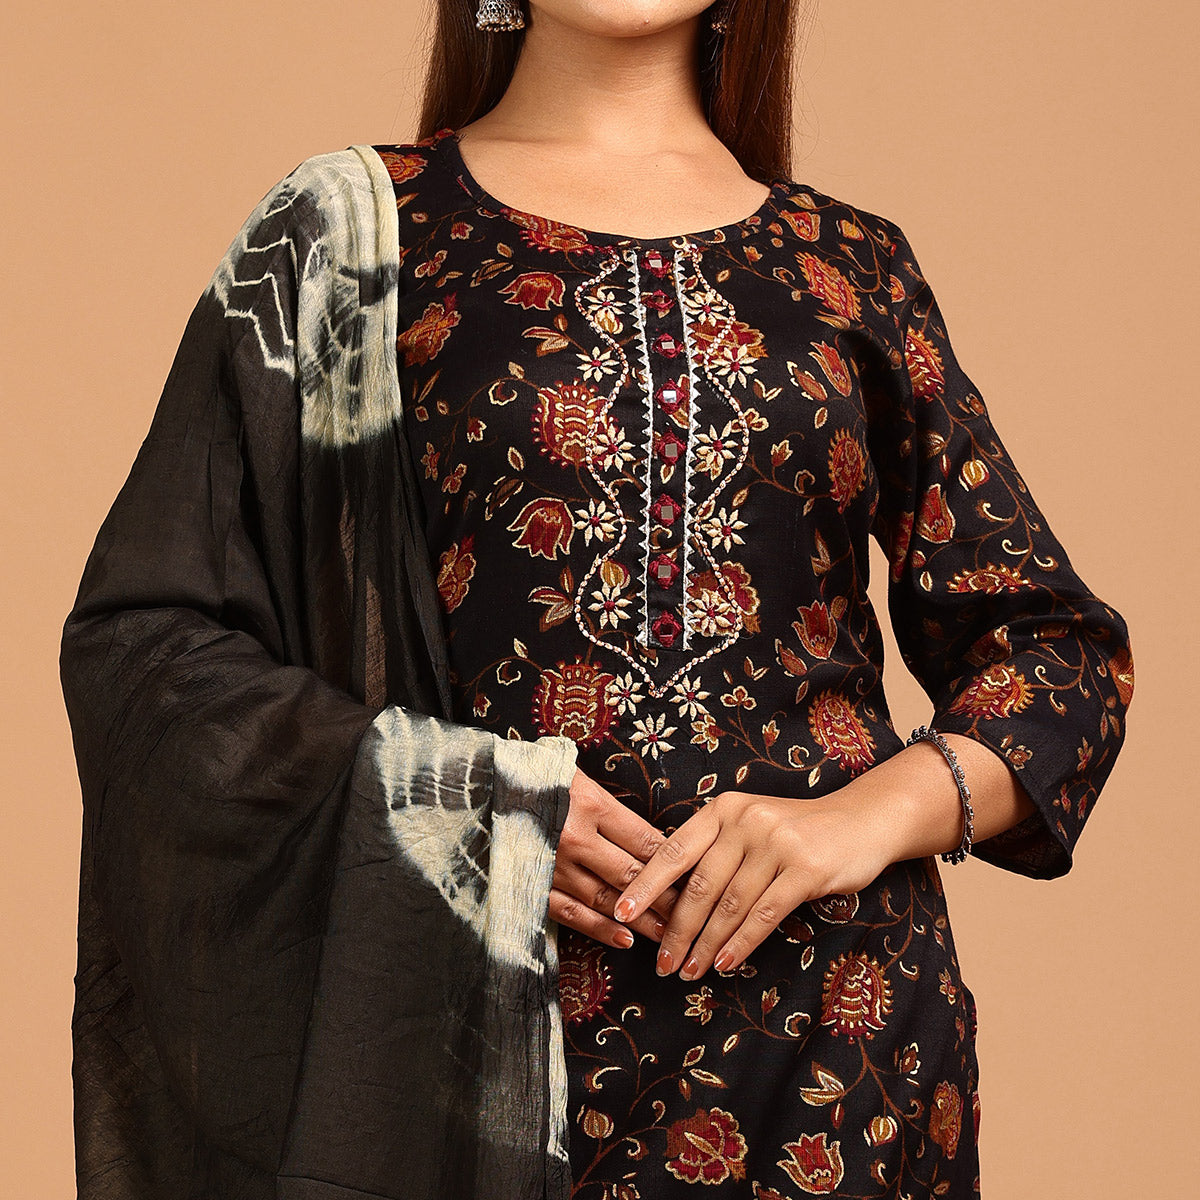 Black Printed With Embroidered Rayon Salwar Suit